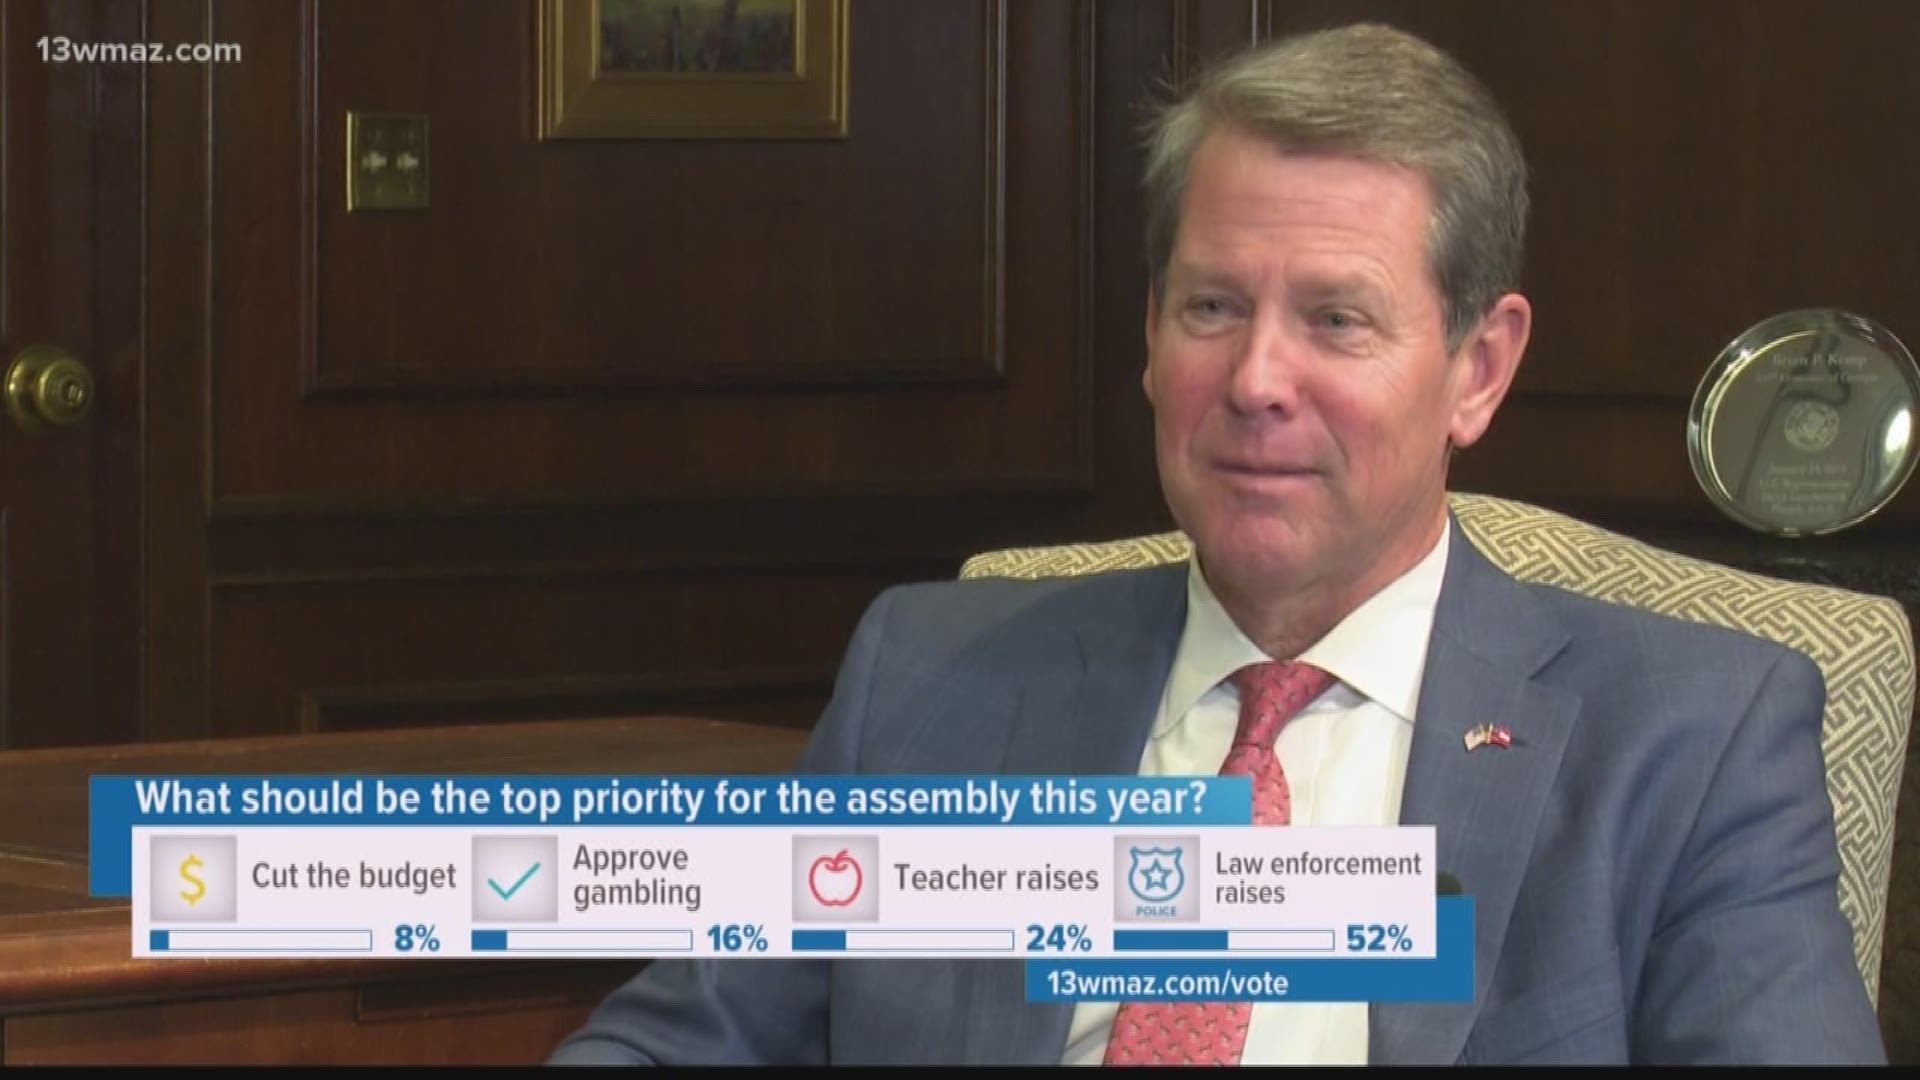 Governor Brian Kemp says he's focusing on public safety and public education, among other topics.